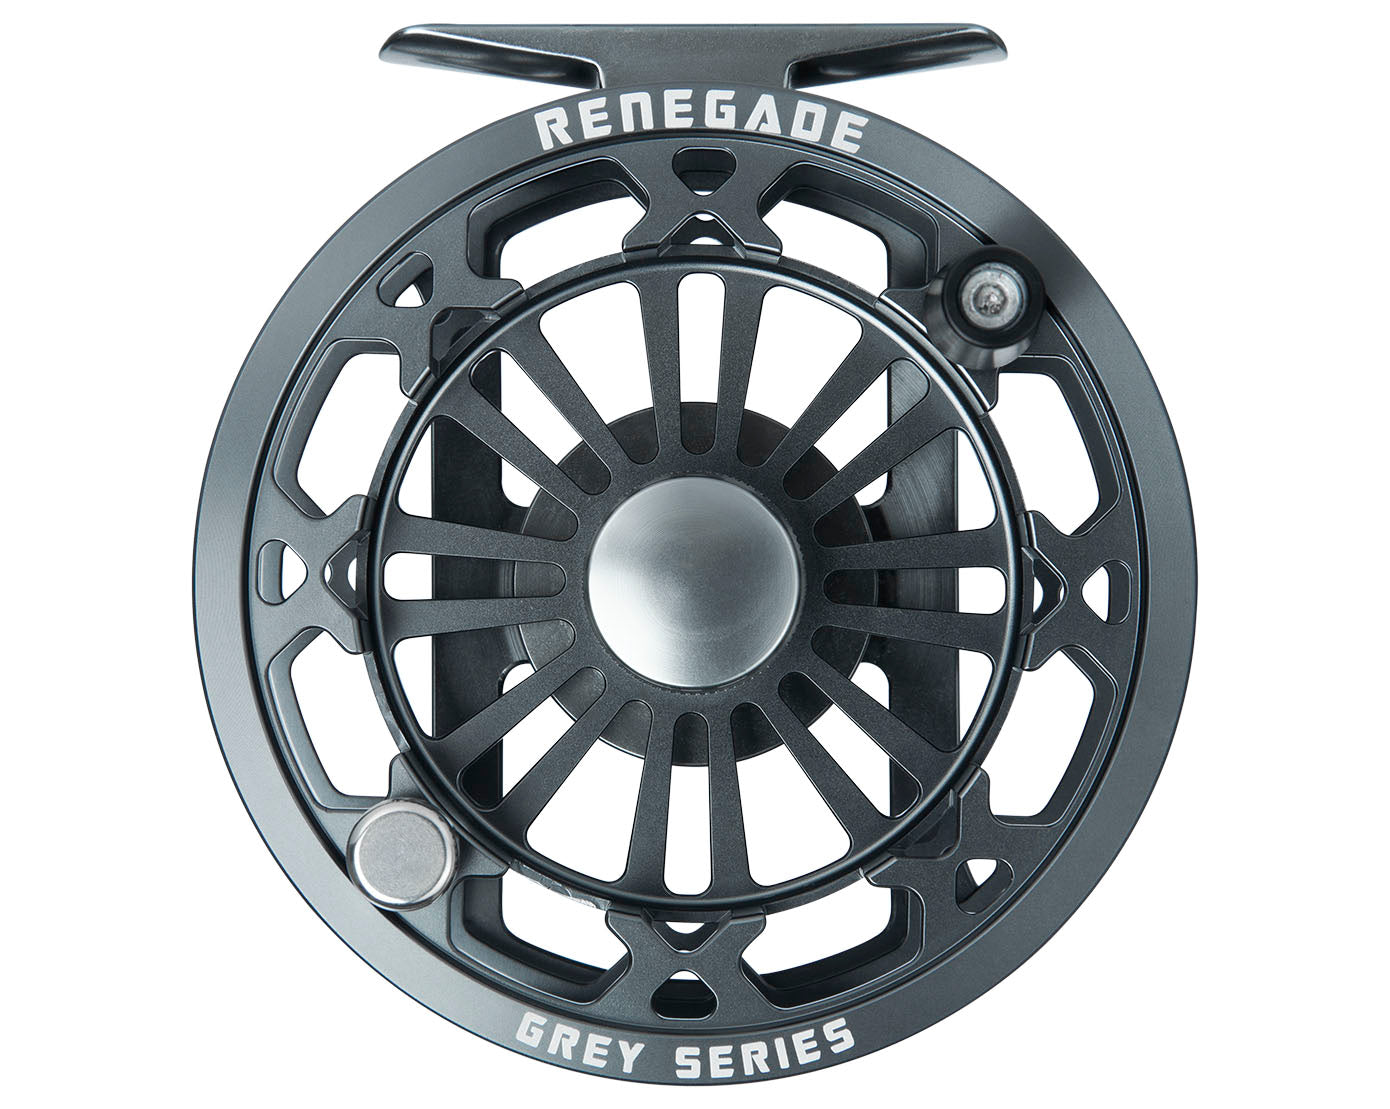 Large Fly Box - renegadeflyrods